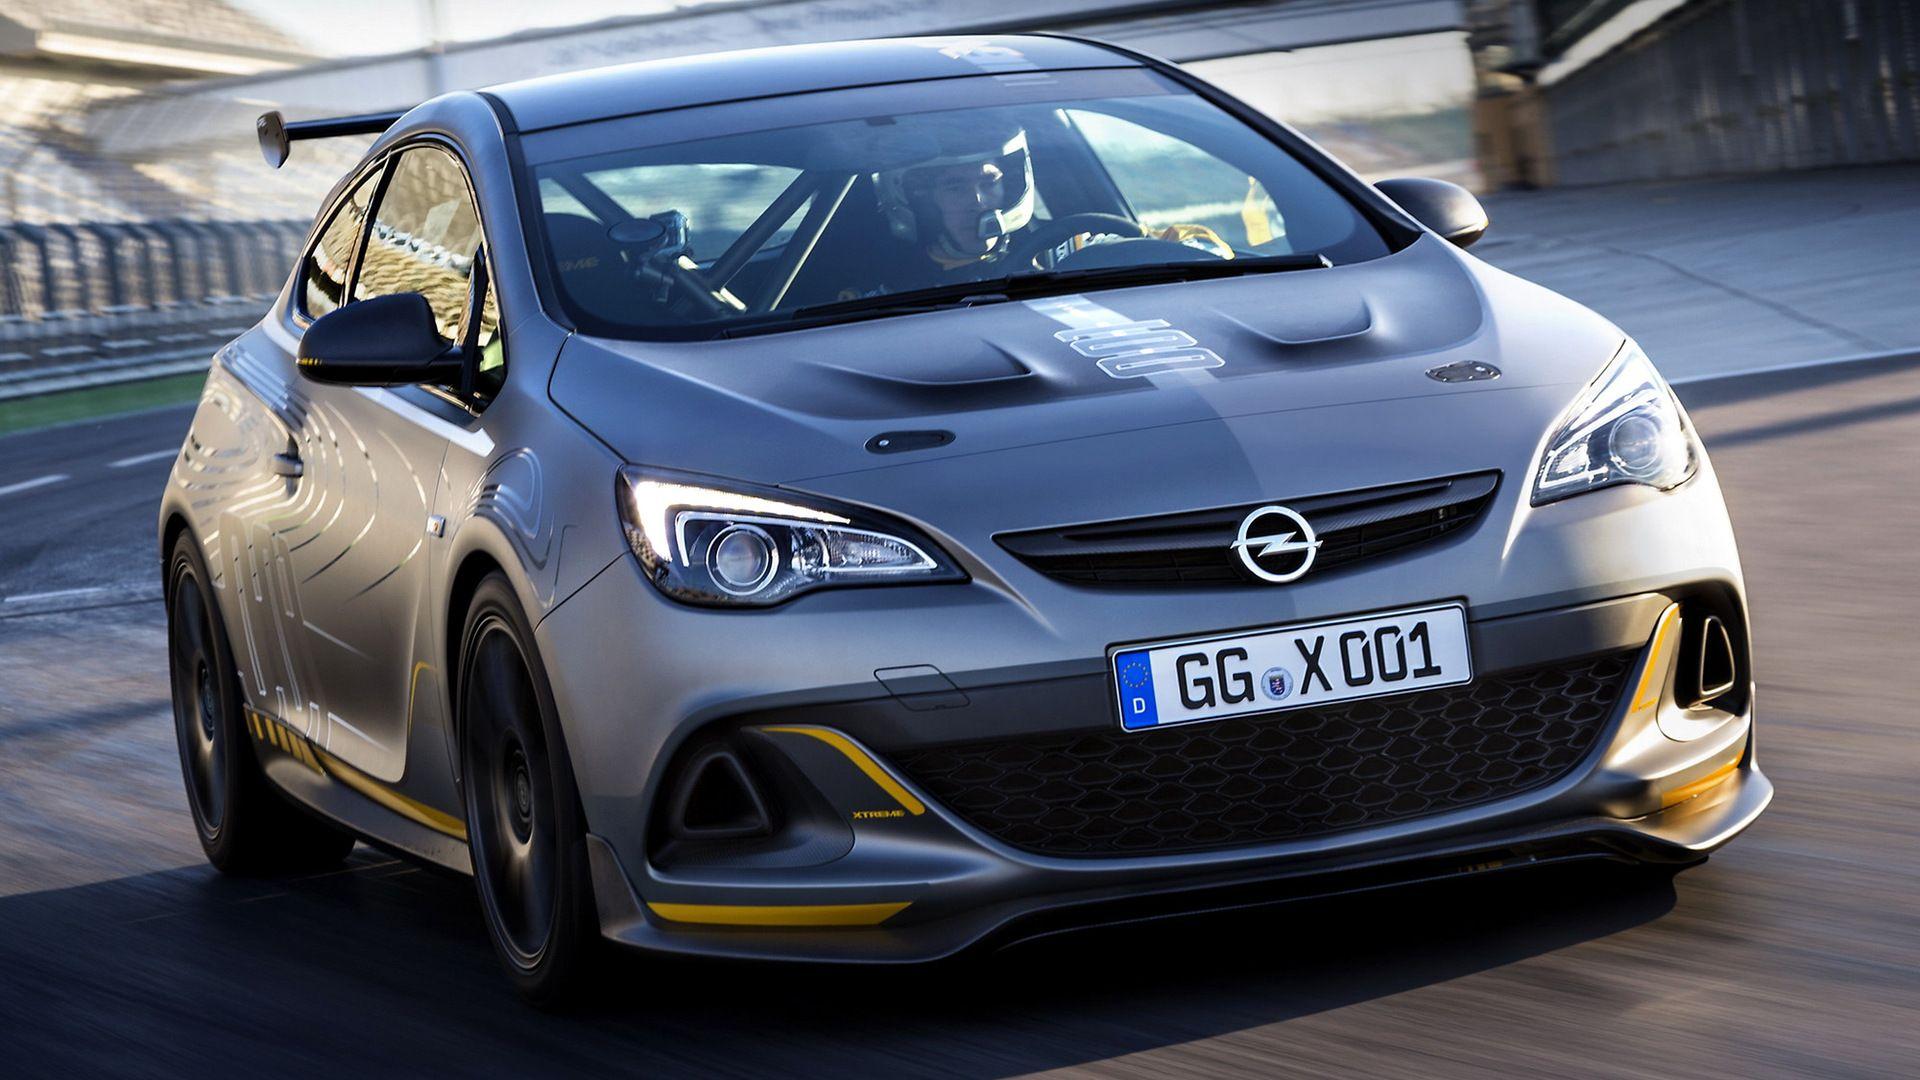 Opel Astra OPC Extreme Concept and HD Image. Car